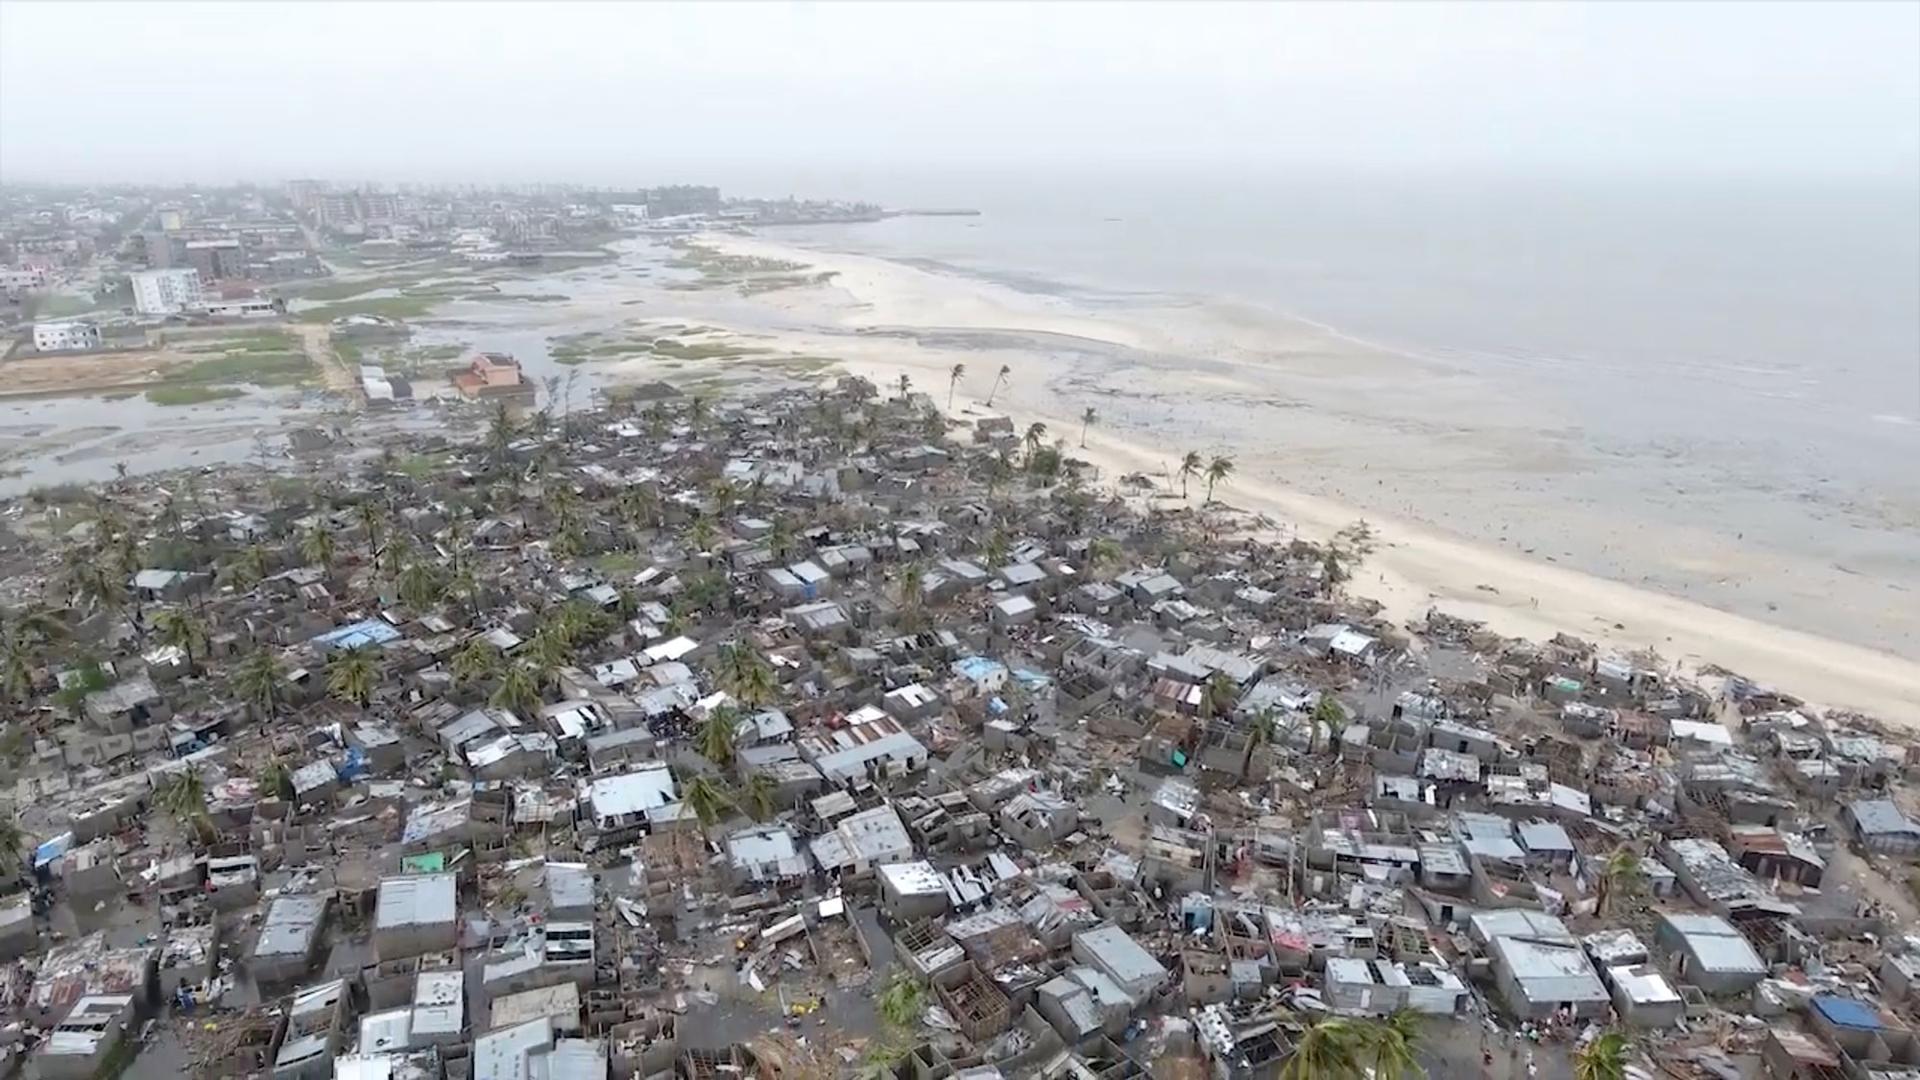 A still photo taken from drone footage above a settlement on the edge of Beira, Mozambique showing dozens of buildings flooded.